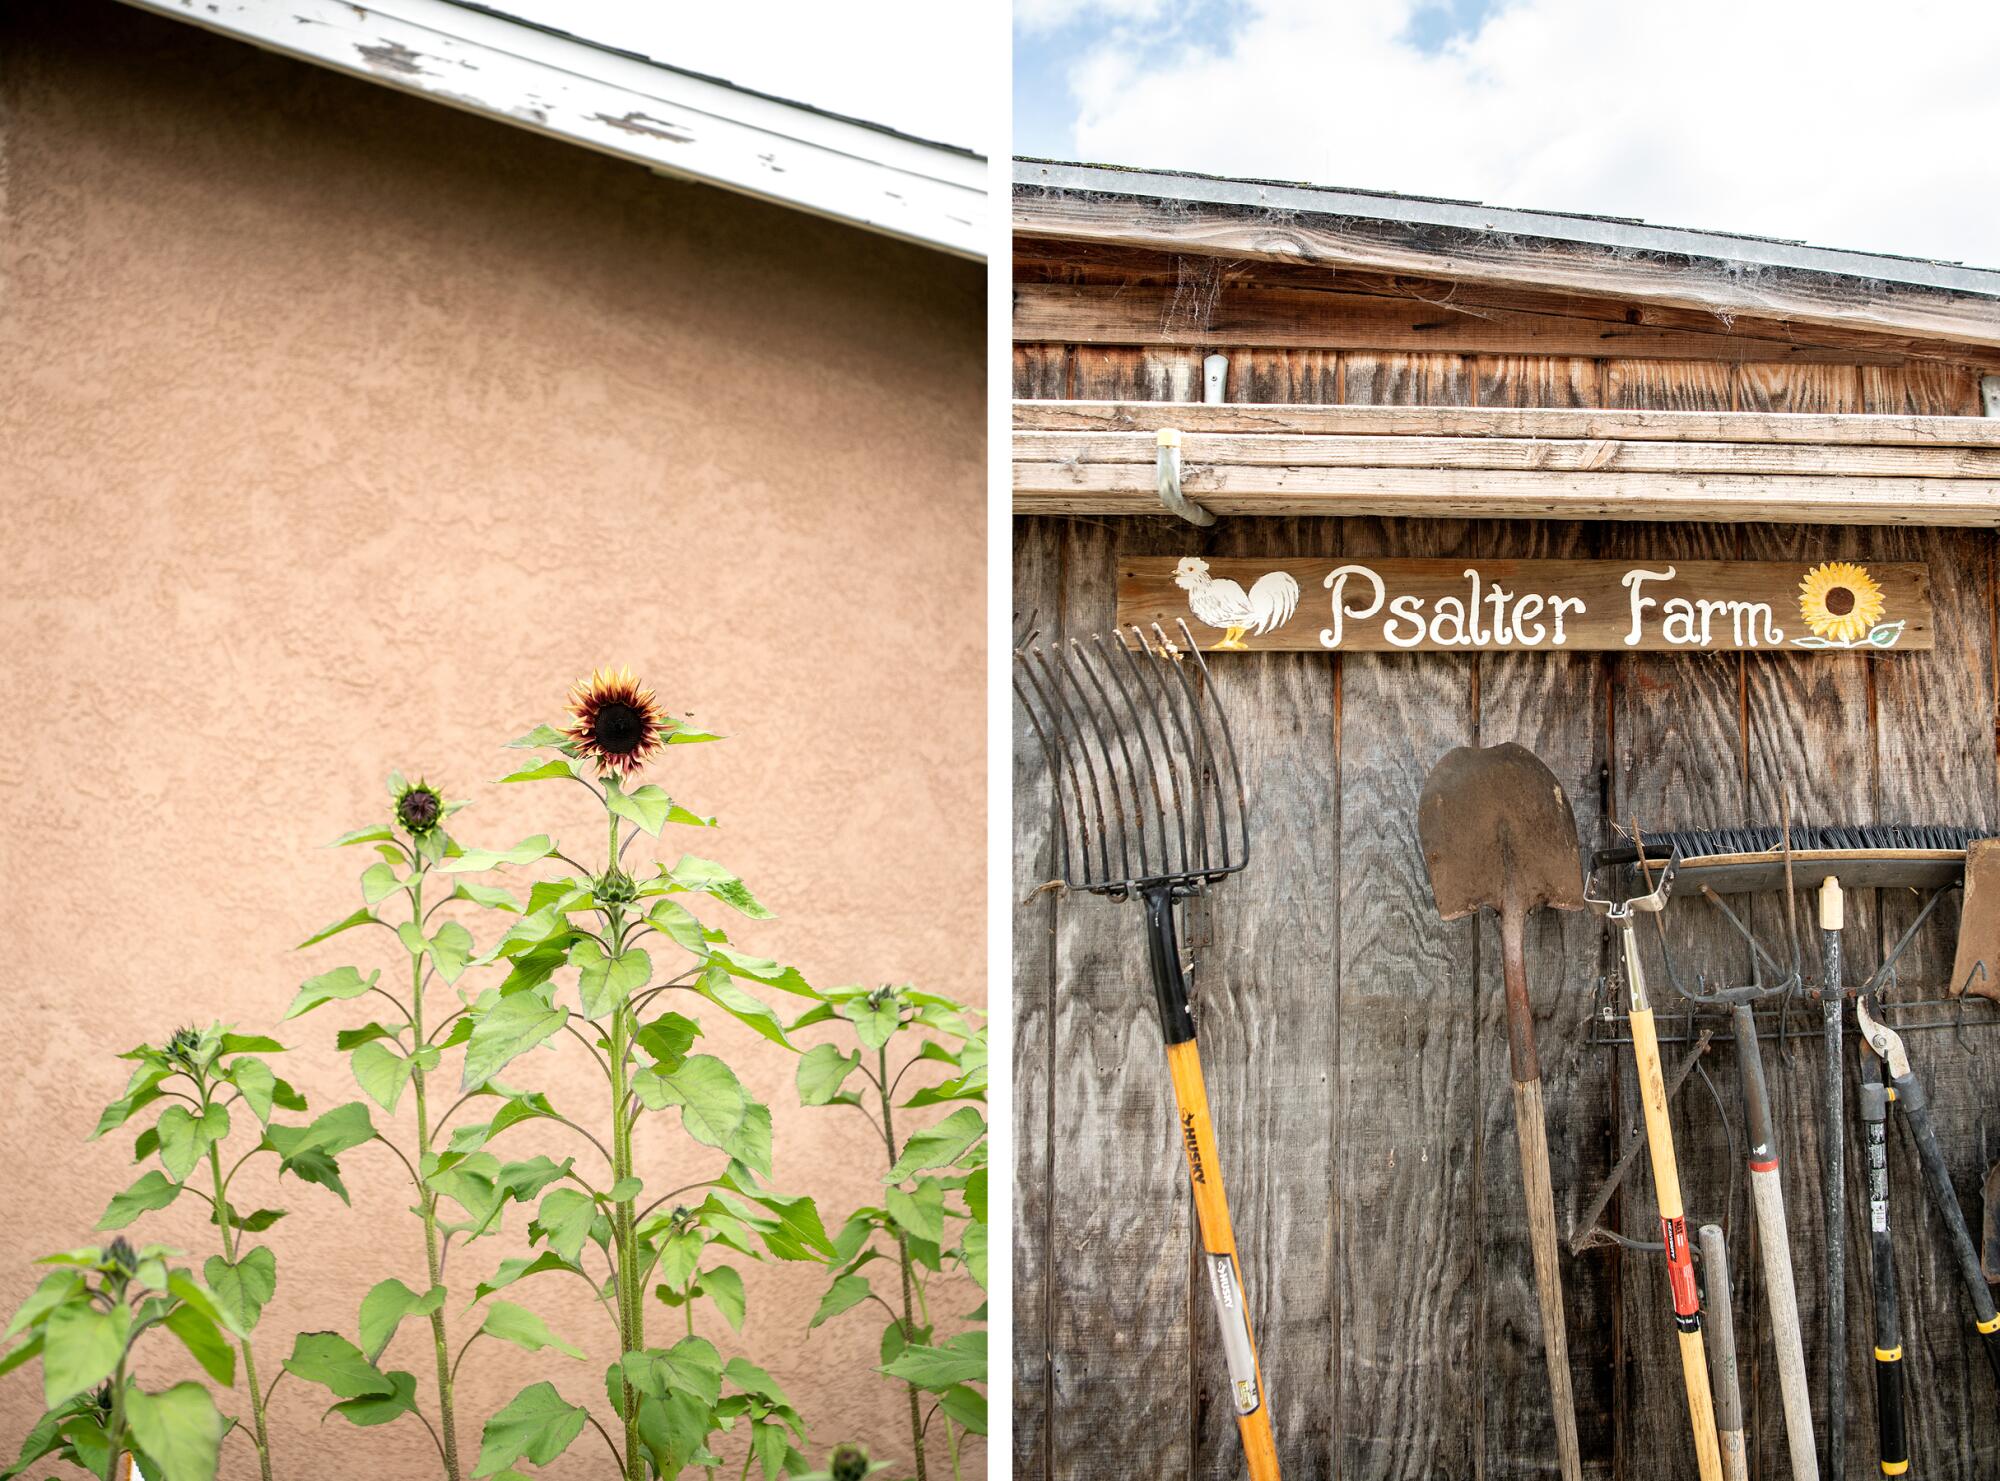 Sunflowers in Tom Weaver's backyard, left, and a sign for Psalter Farm, made by Rachel Nafis' father, right.